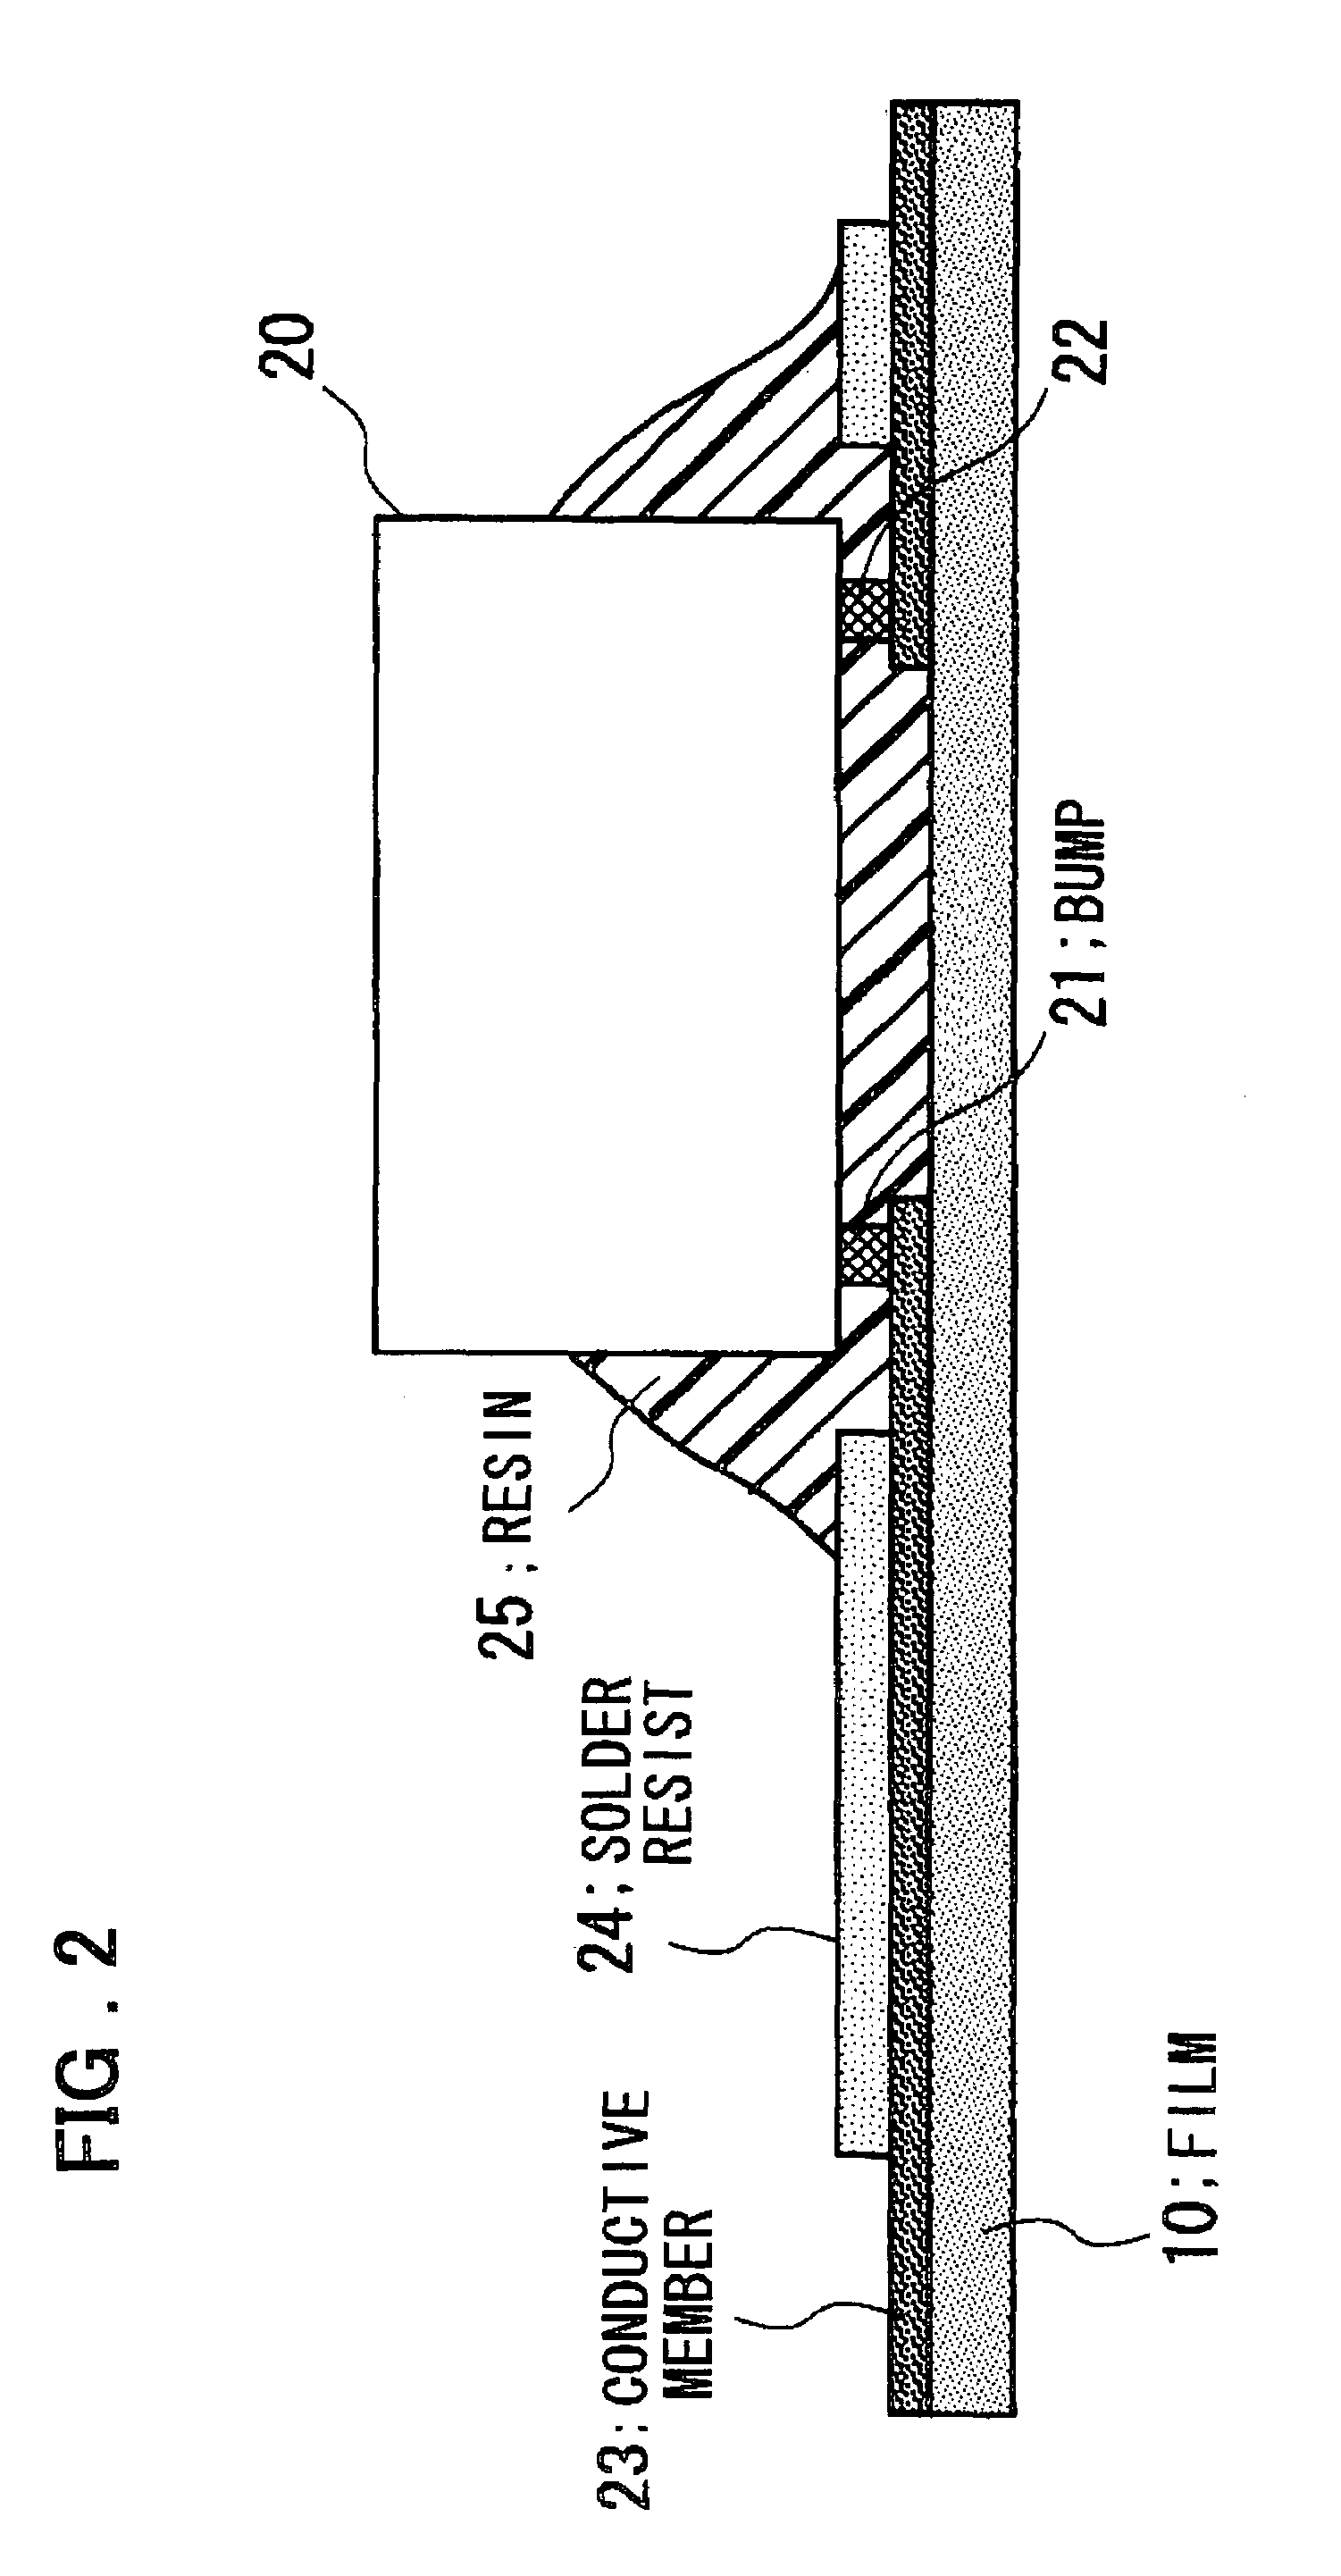 Semiconductor chip mounting arrangement